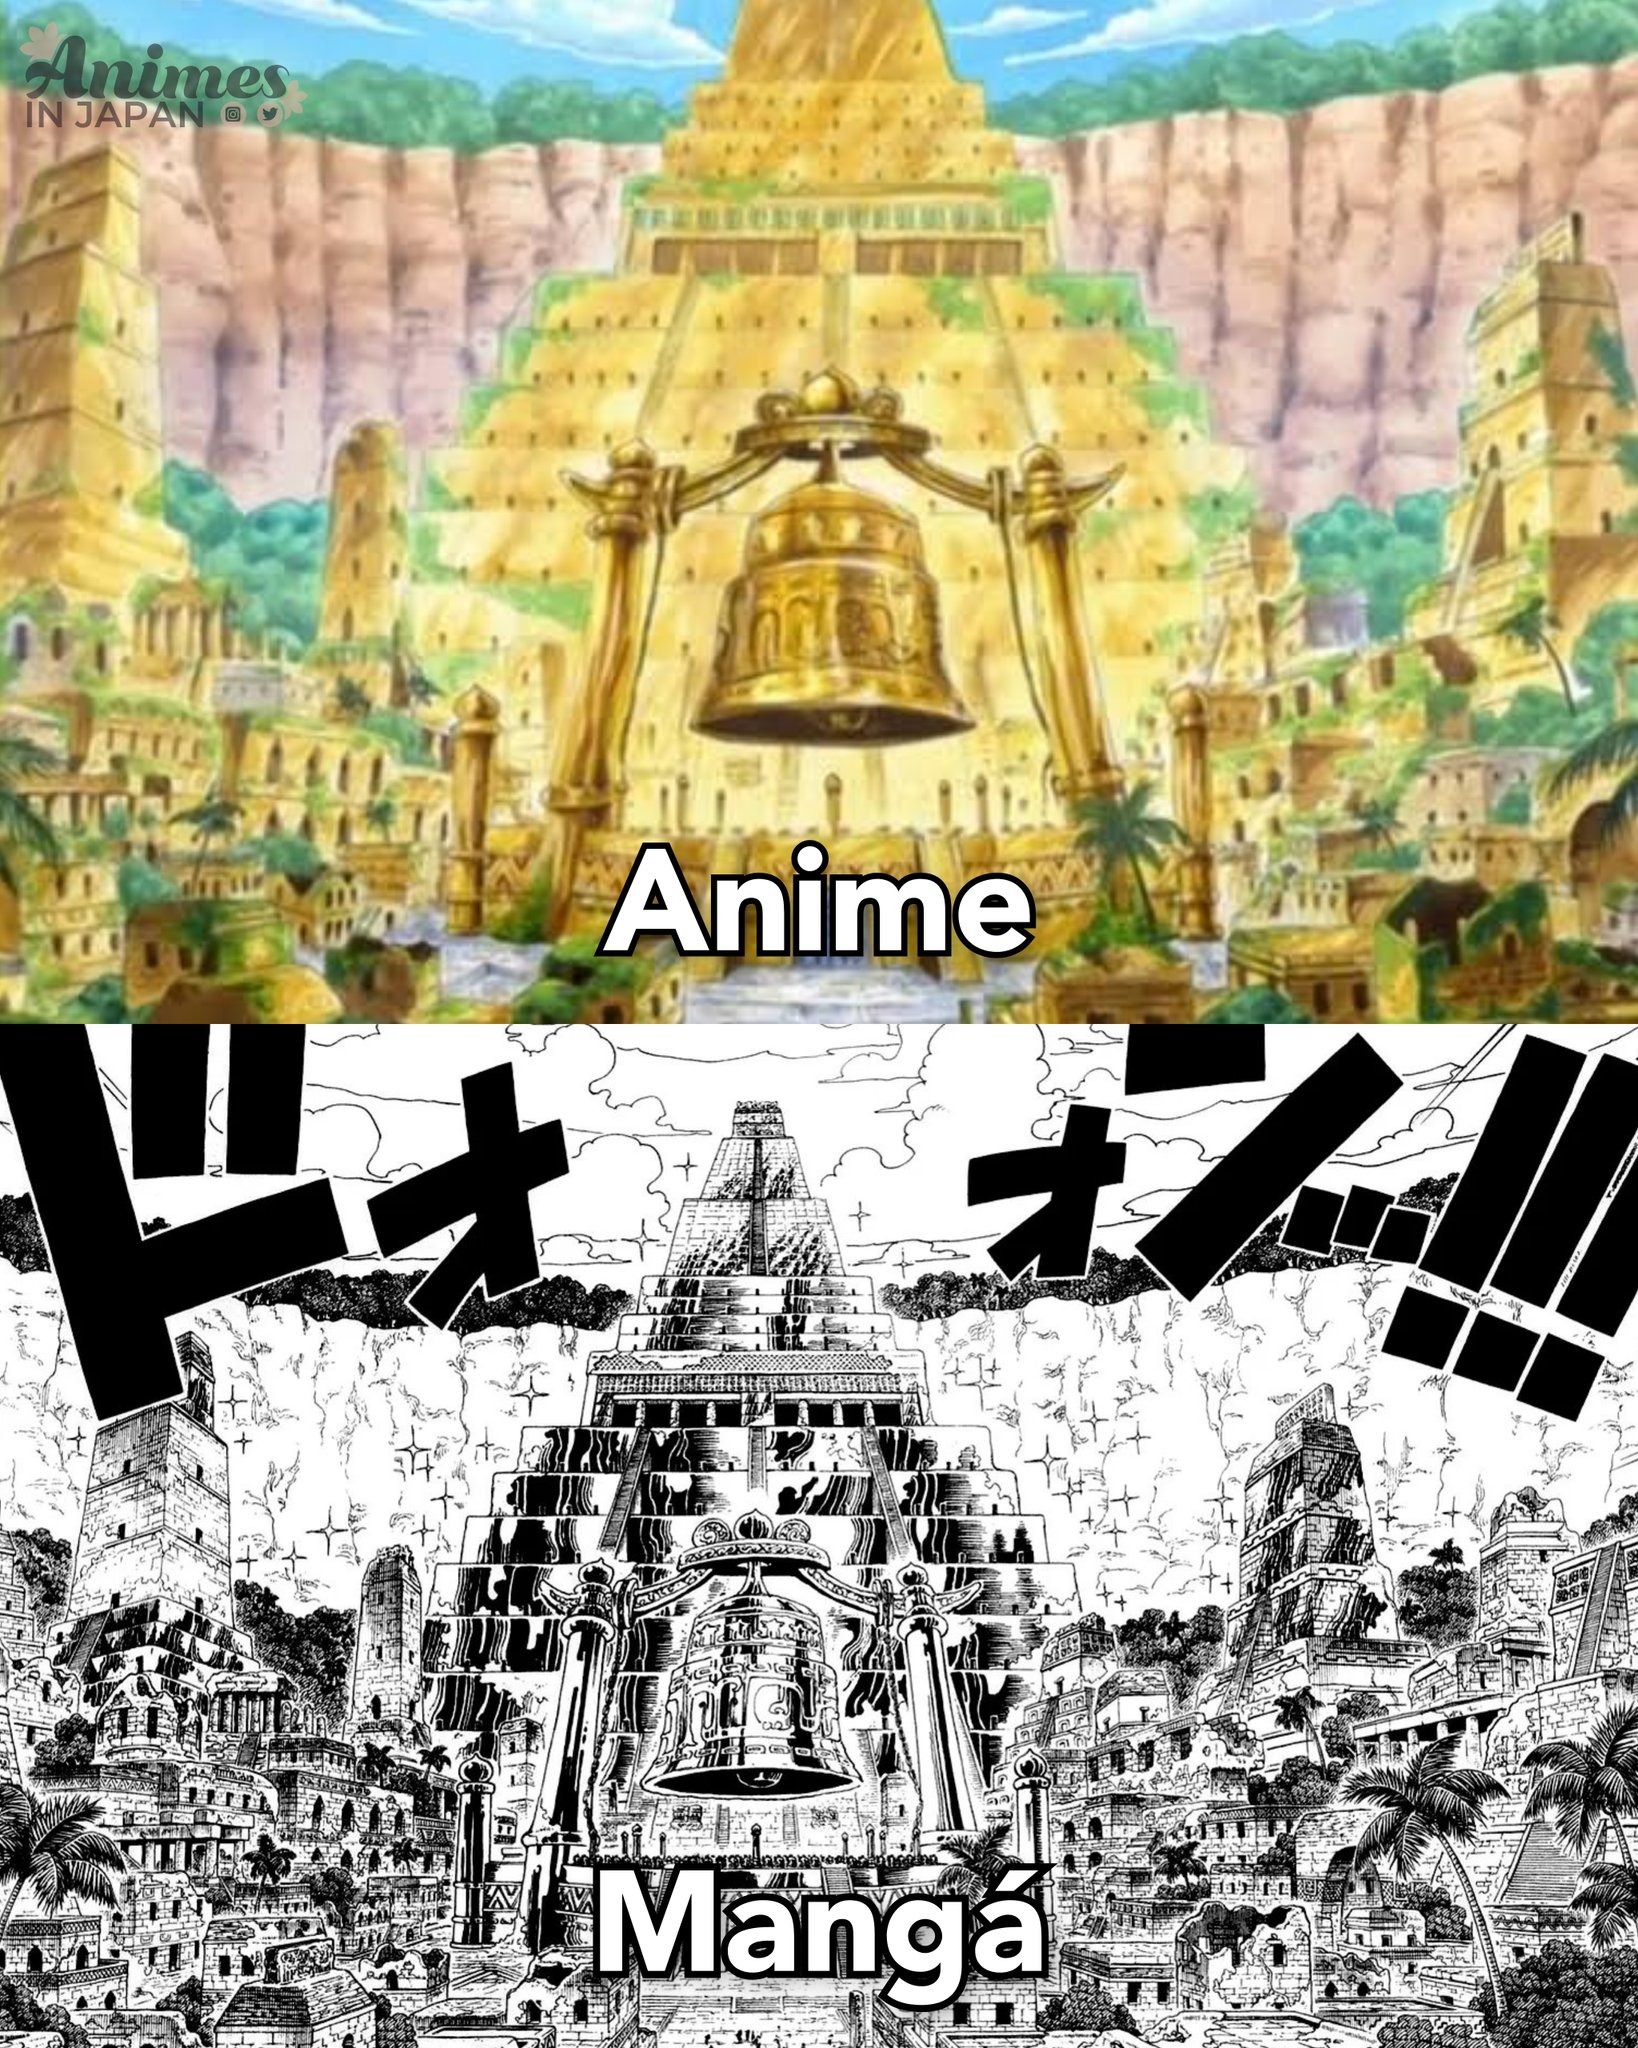 Is One Piece 🔥 inspired by 🔥 Mysterious Cities of Gold #datadigger3d # onepiece #anime 